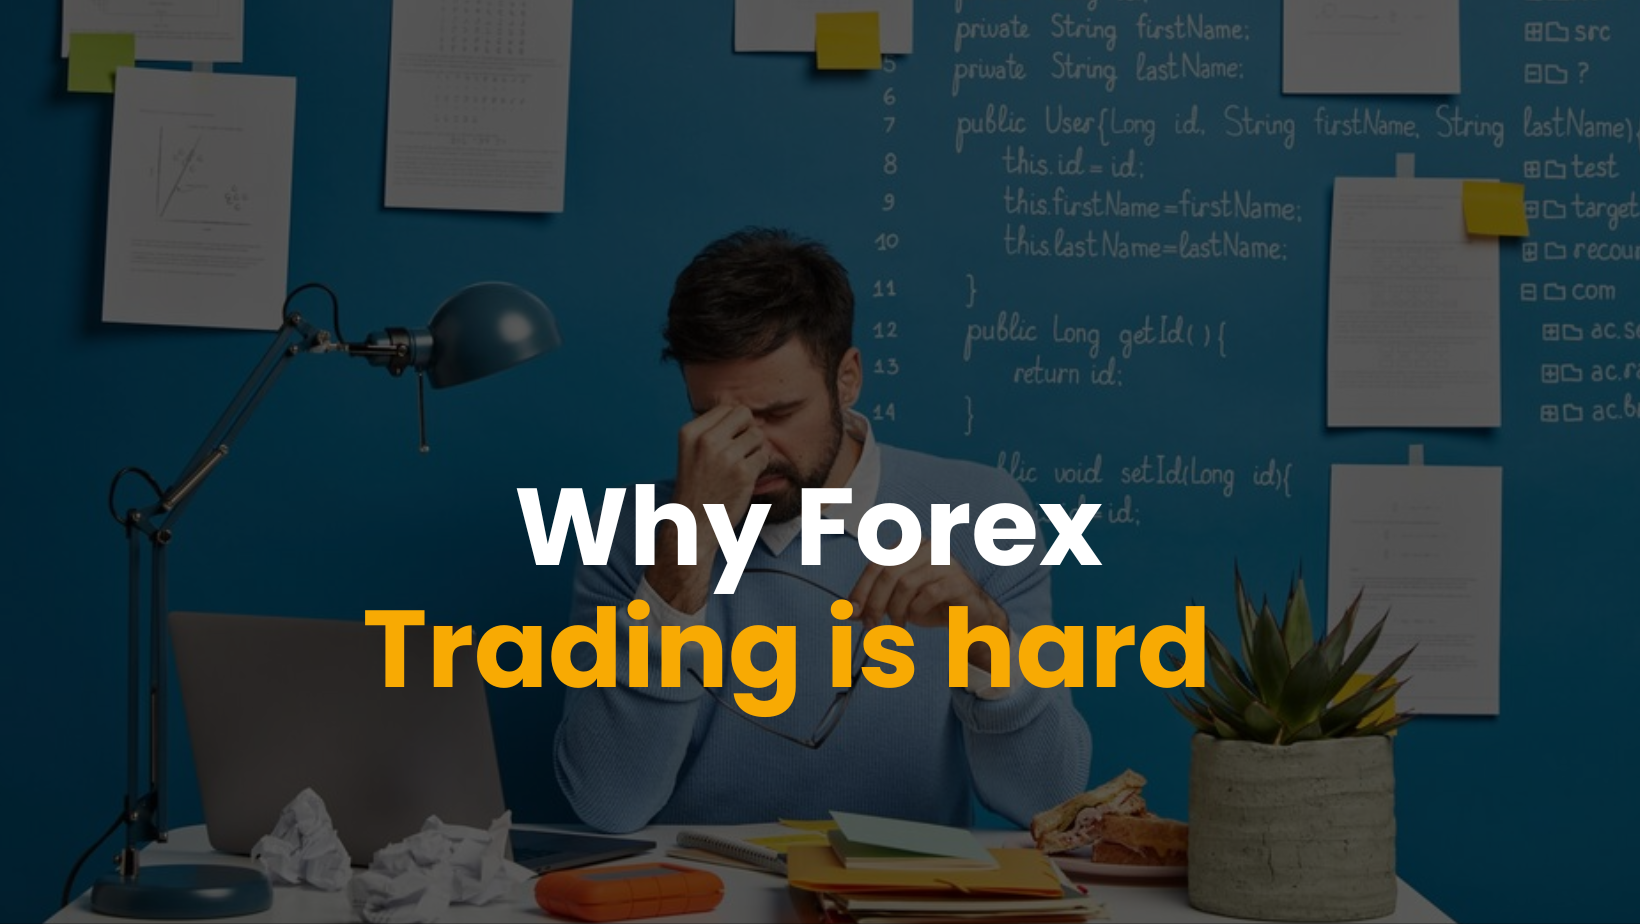 Why Forex Trading is hard